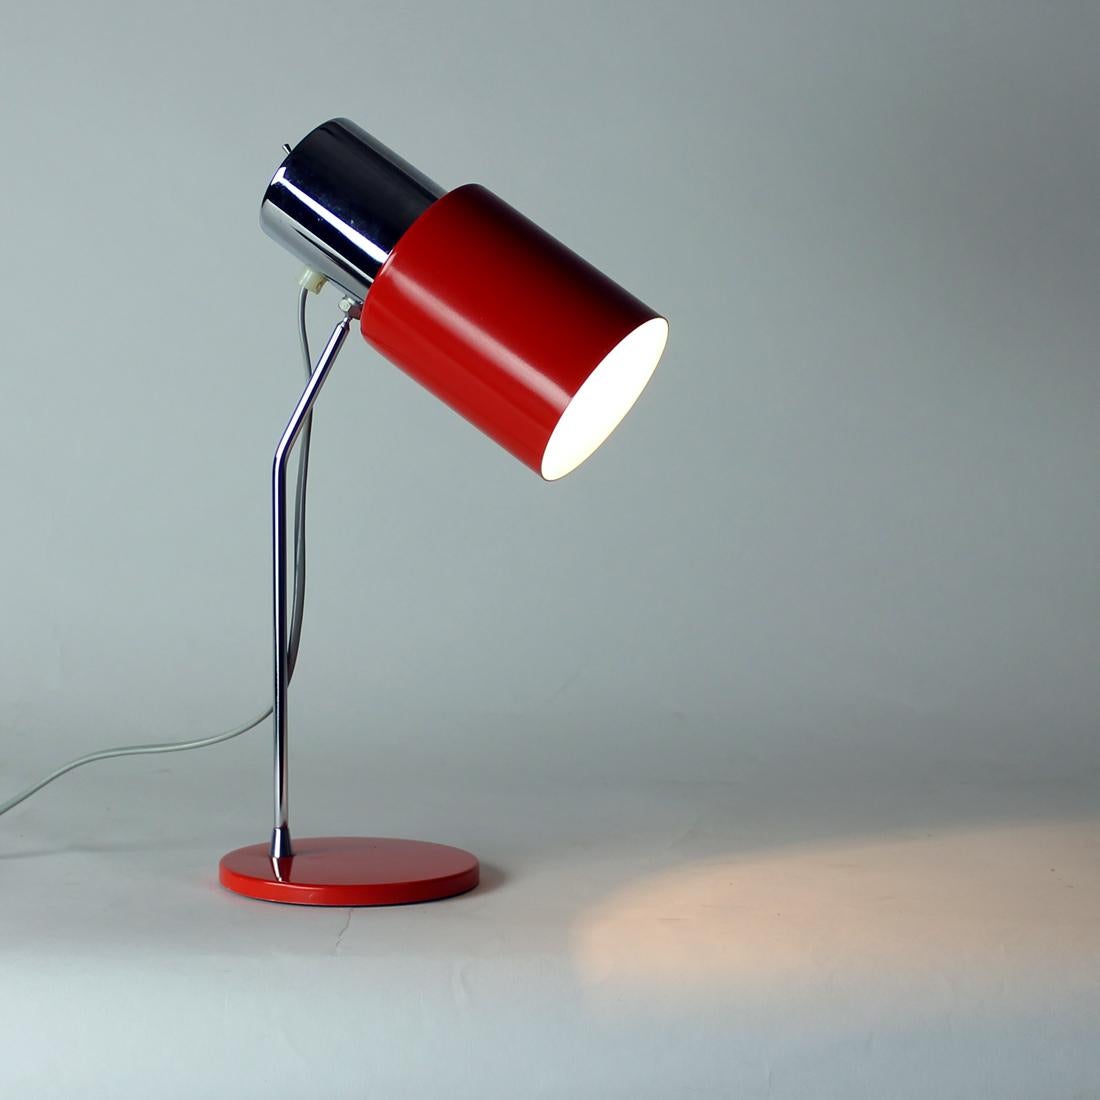 Table Lamp in Chrome and Red Metal, by Josef Hurka for Napako, 1960s For Sale 3